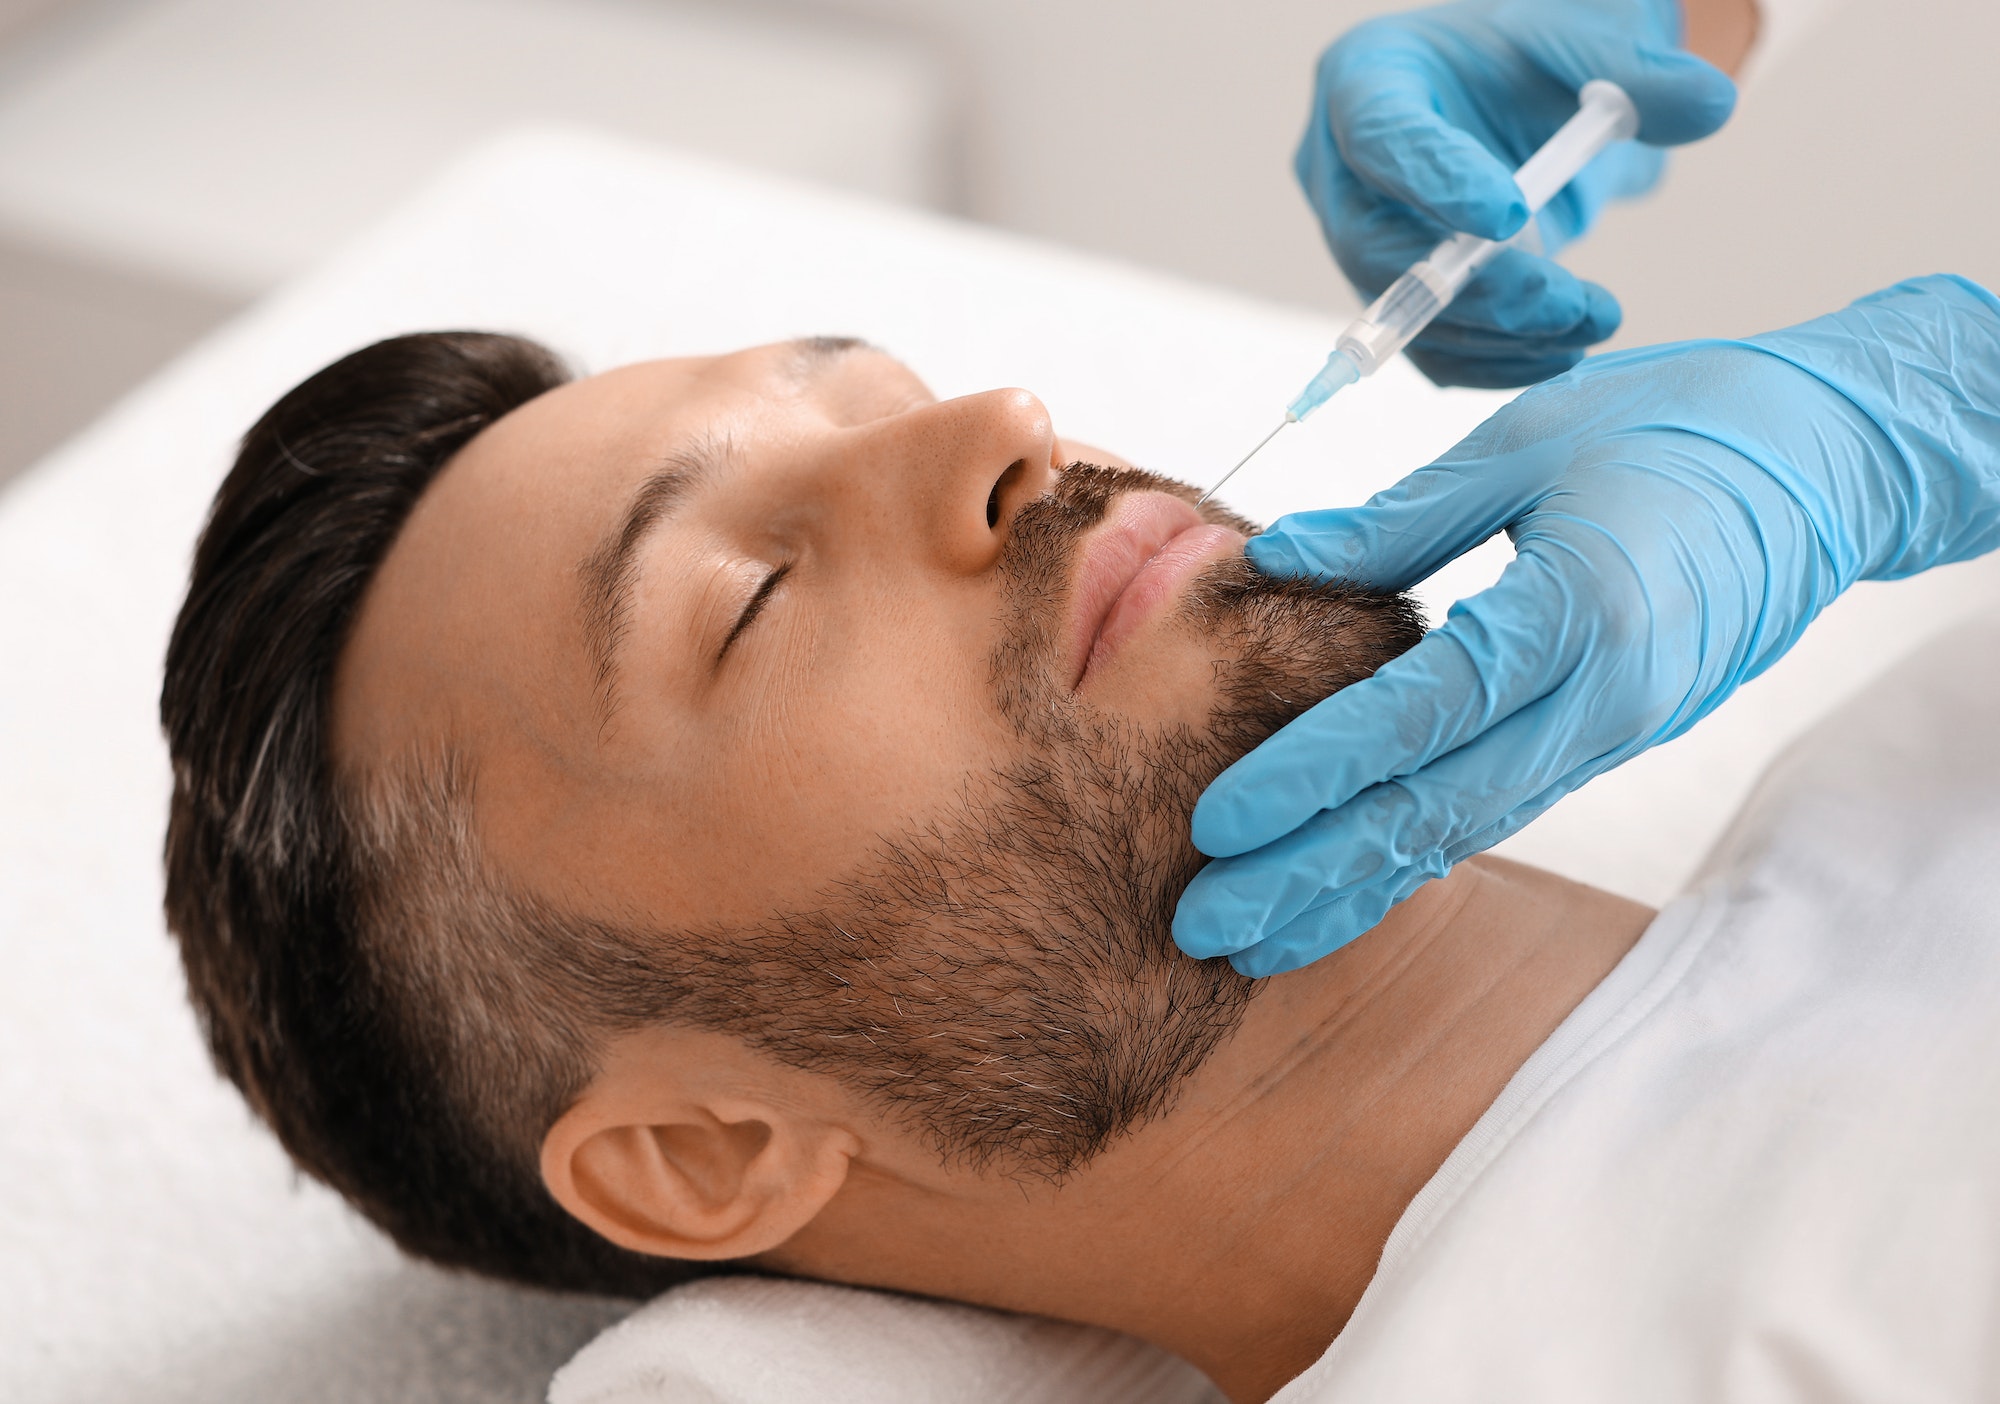 Attractive man visiting aesthetic clinic, getting lips filler